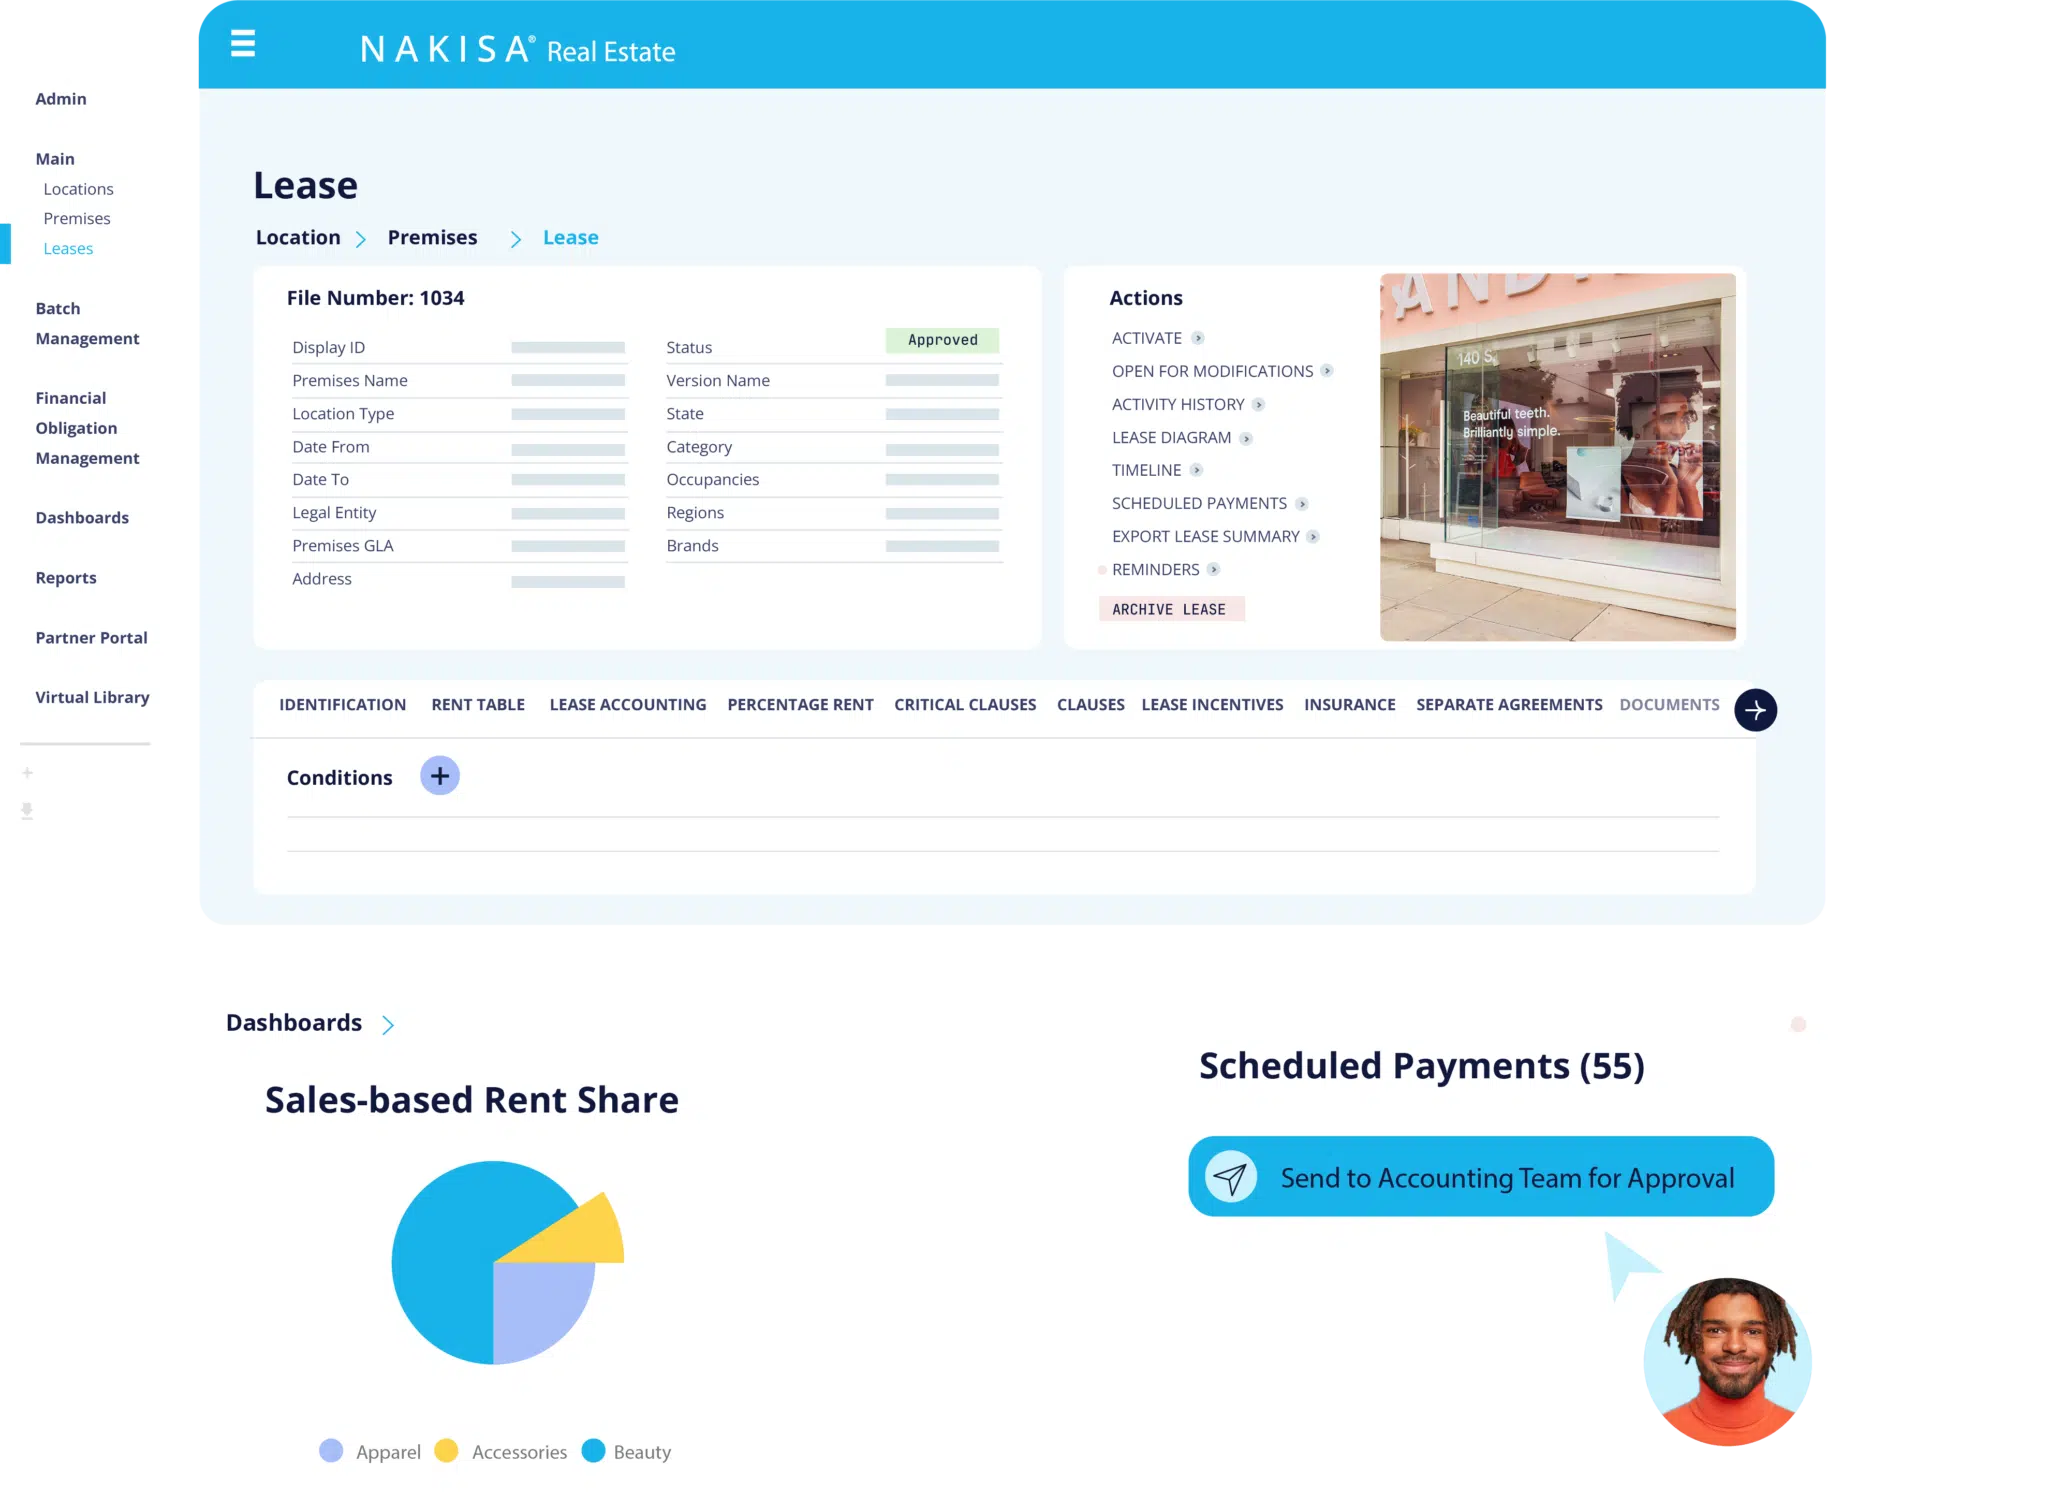 Manage all your owned, leased, and sub-leased real estate assets throughout the entire lifecycle with Nakisa Real Estate